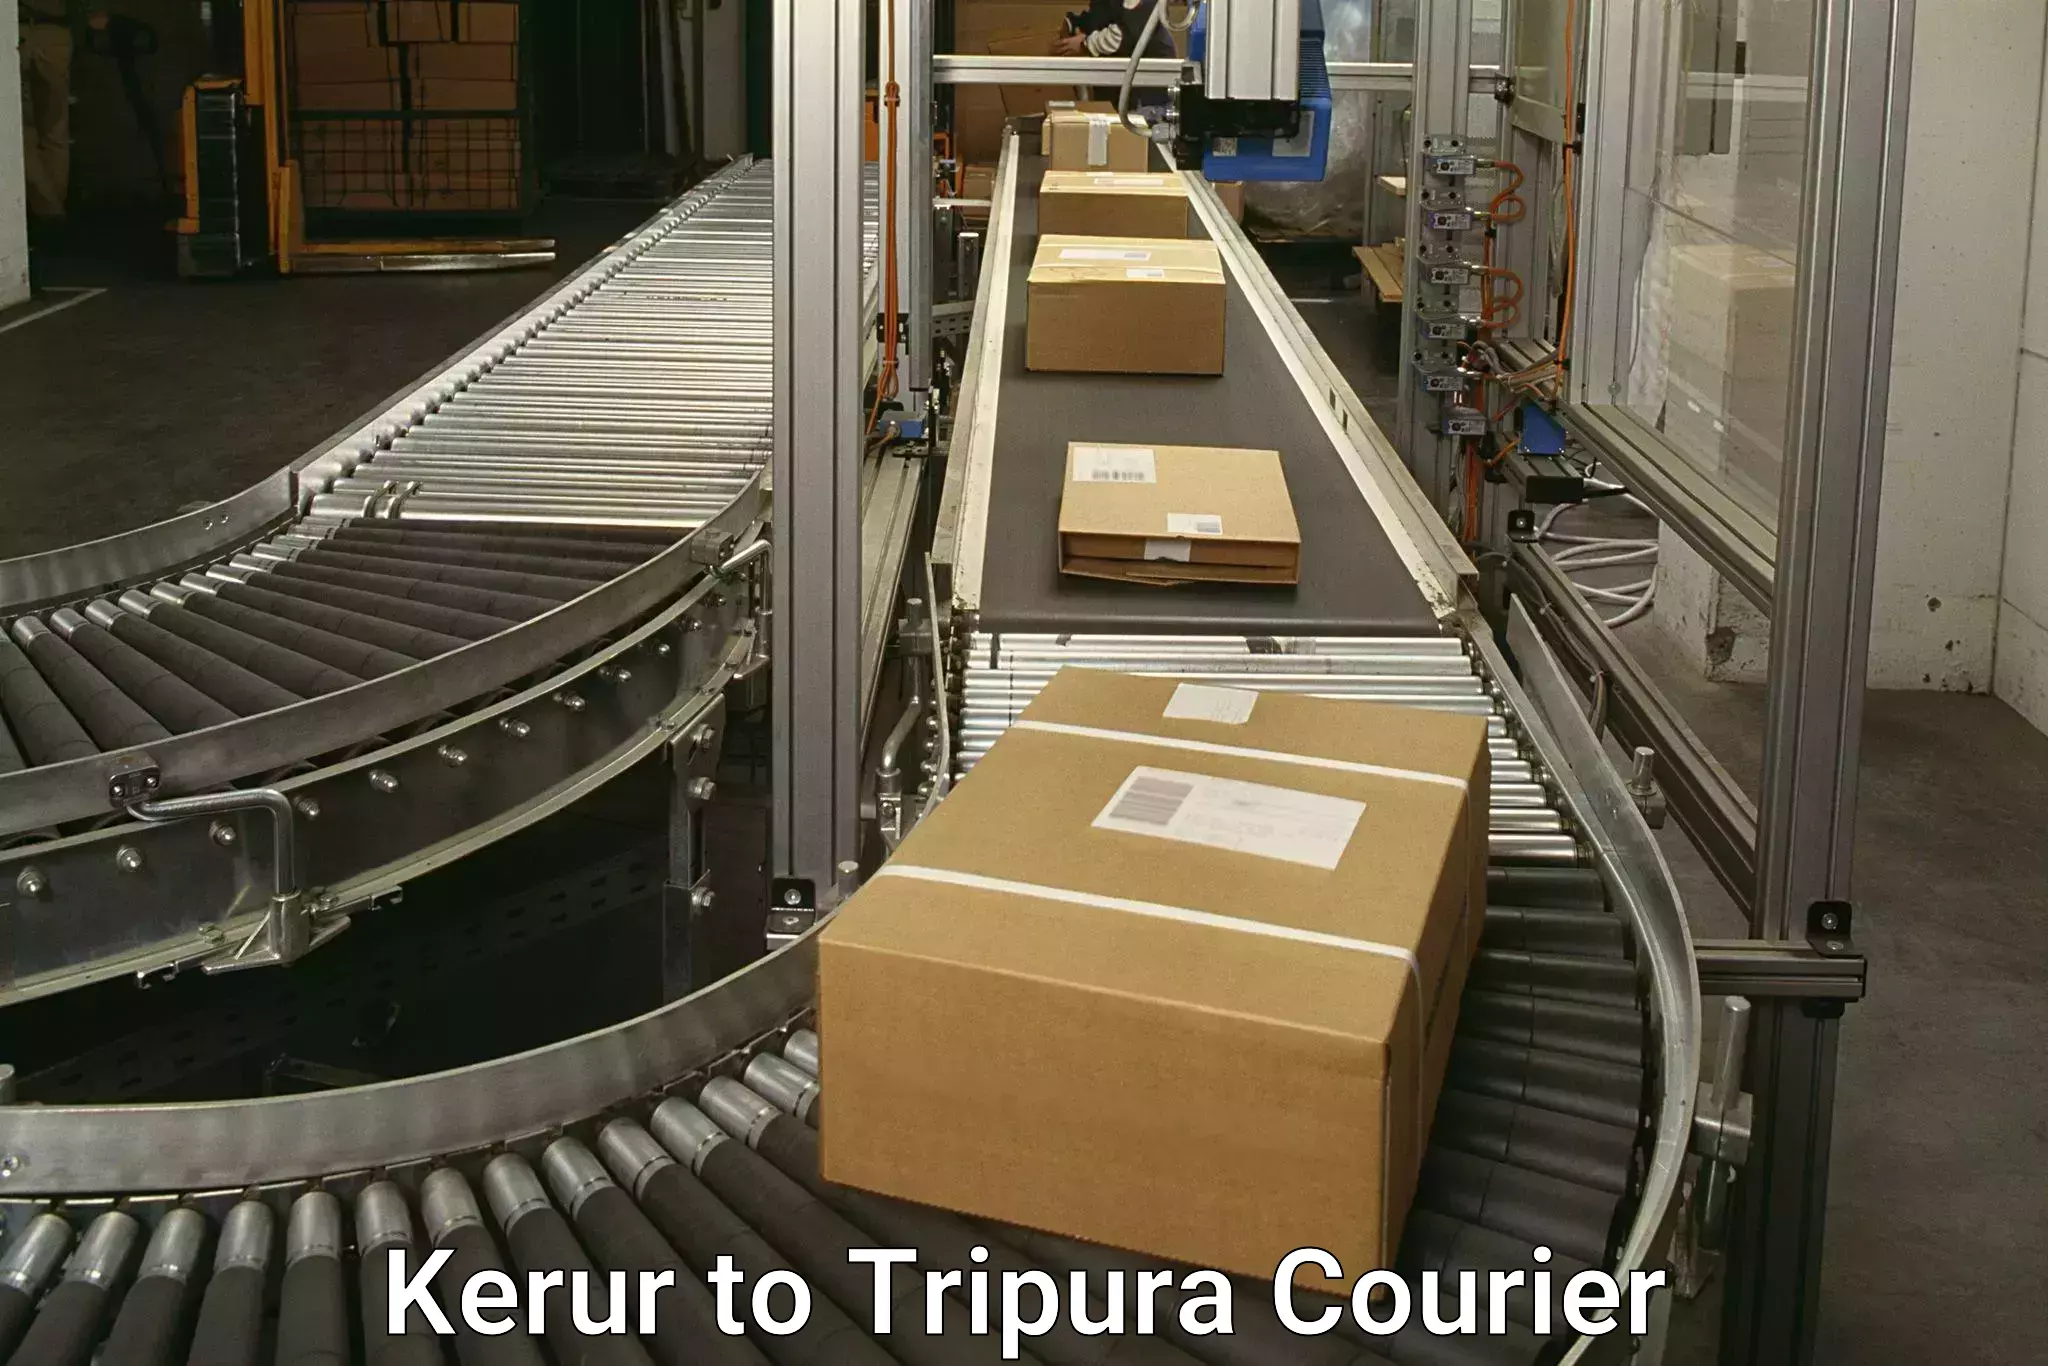 State-of-the-art courier technology Kerur to Udaipur Tripura